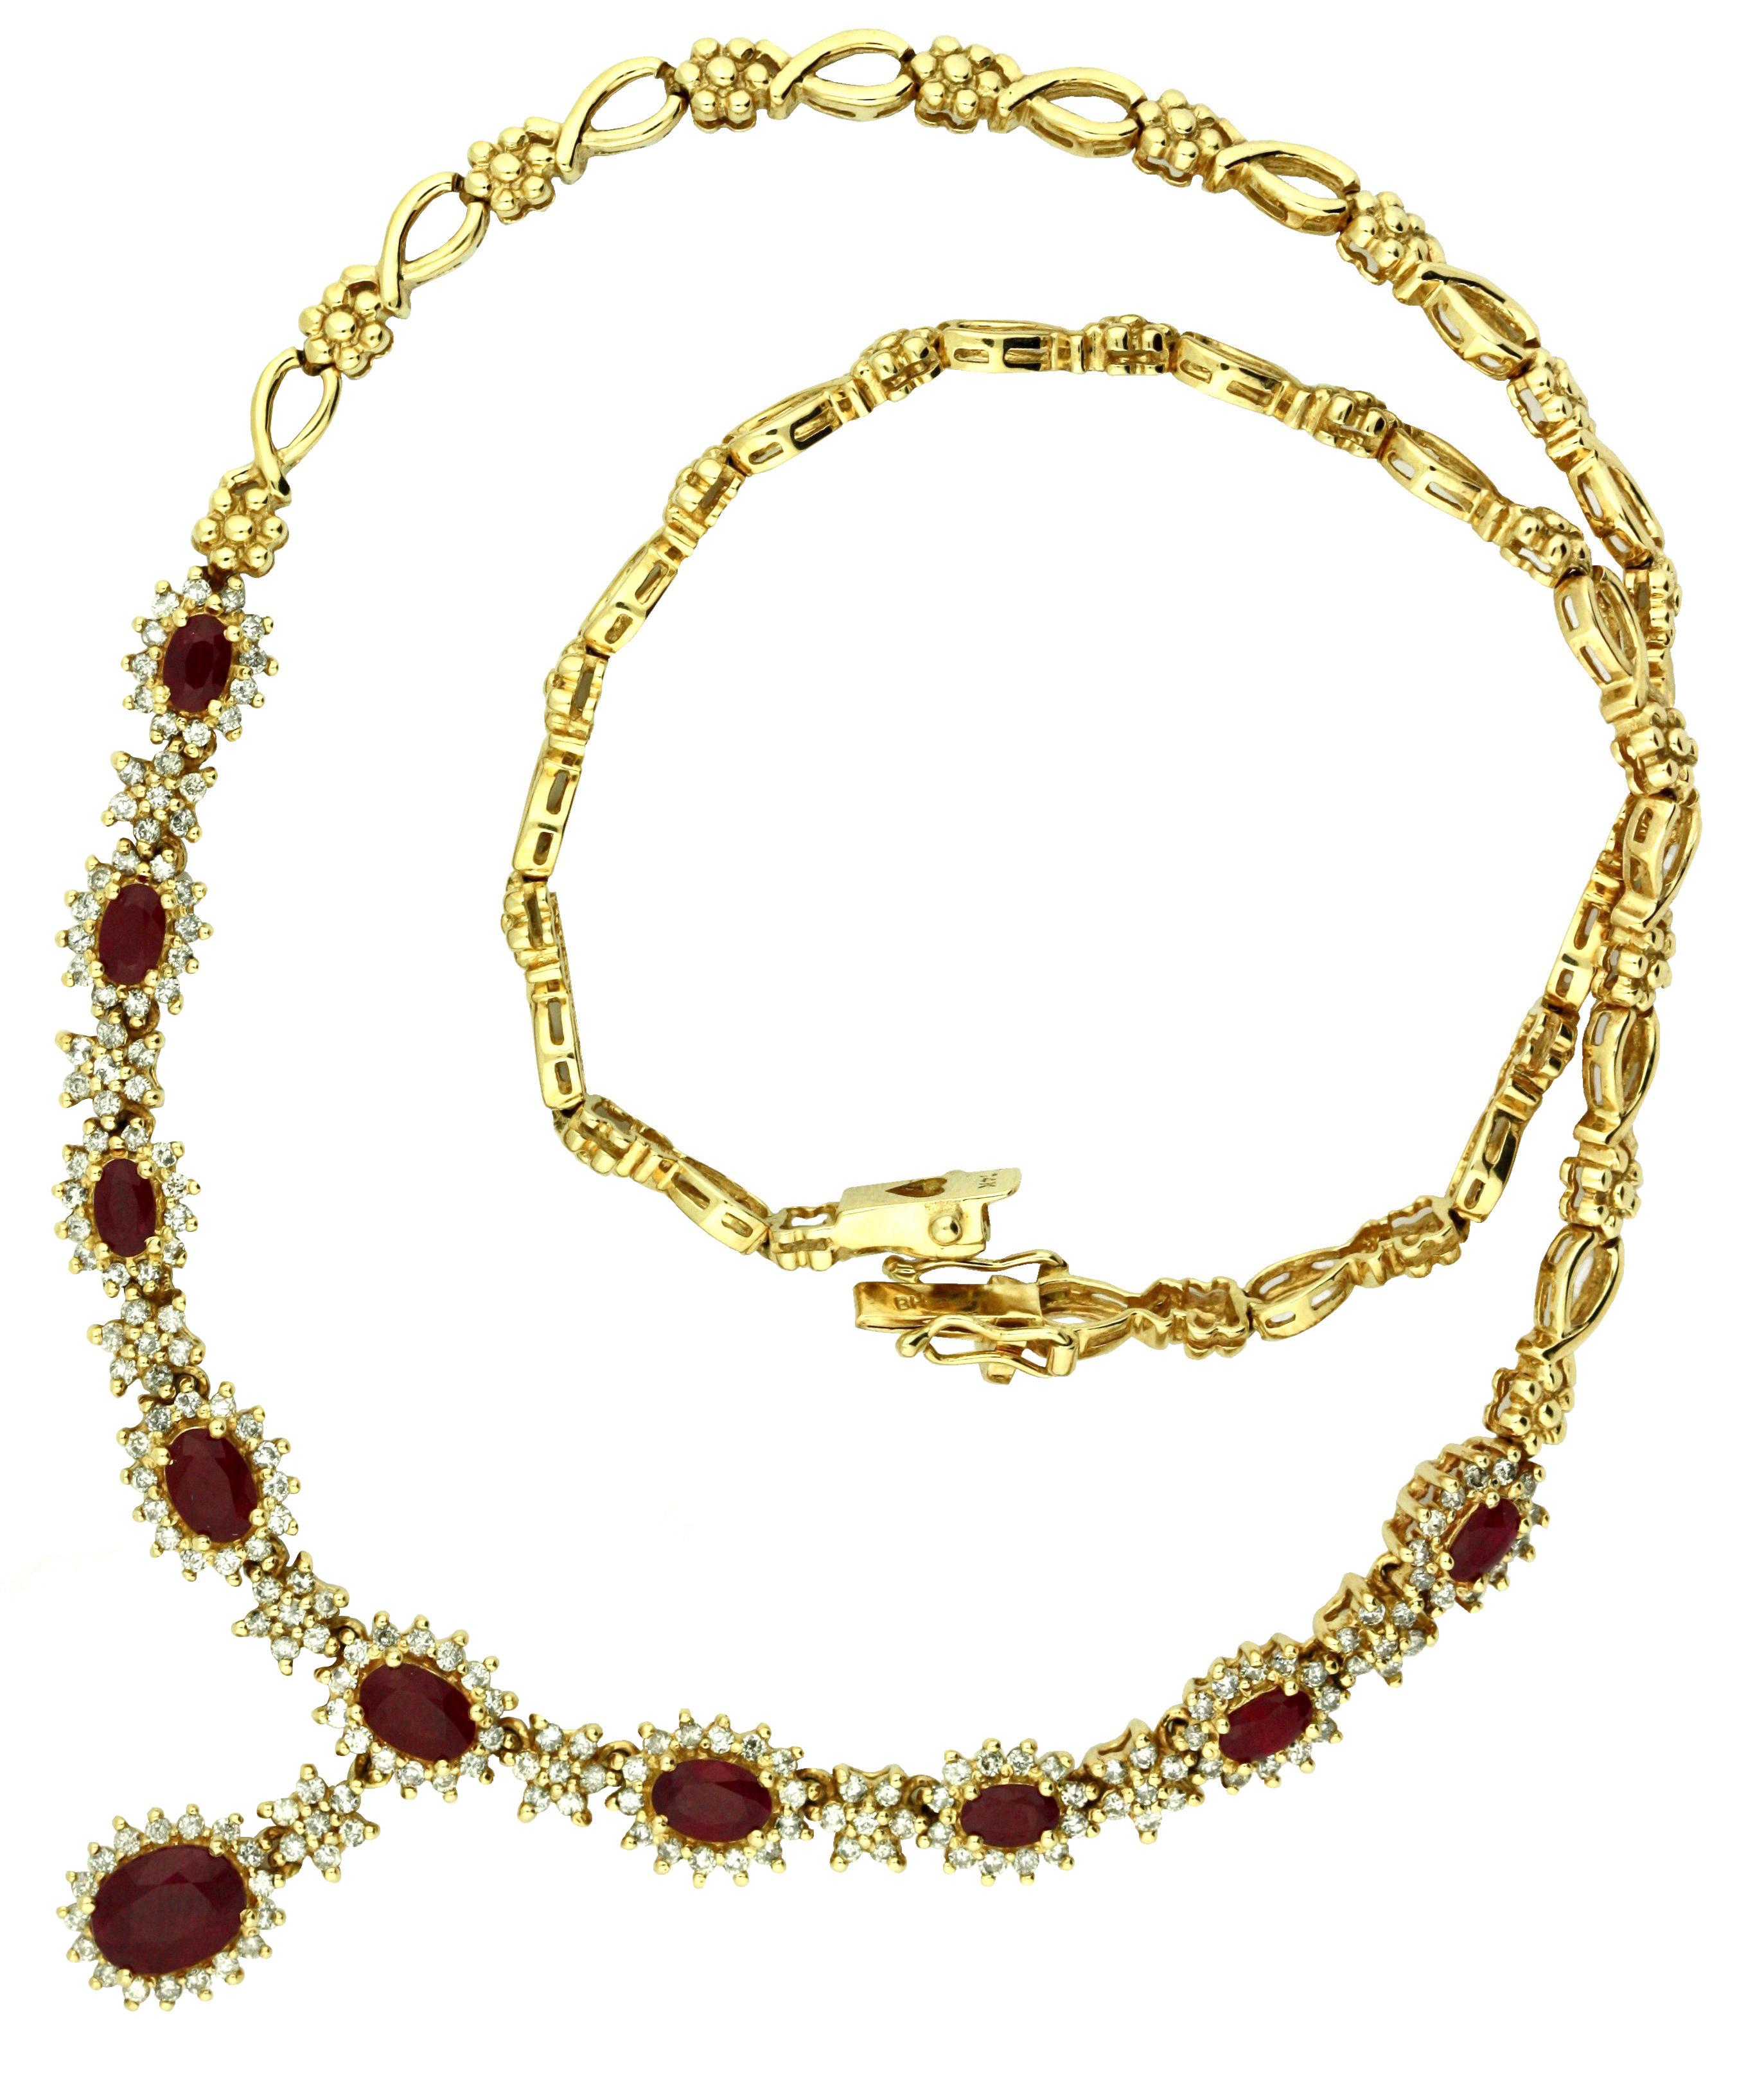 RUBY AND DIAMOND NECKLACE
set with ten oval-shaped rubies together weighing approximately 5.09 carats, highlighted with 187 round full-cut diamonds weighing approximately 4.86 carats, mounted in 14 karat yellow gold, length approximately 16 inches